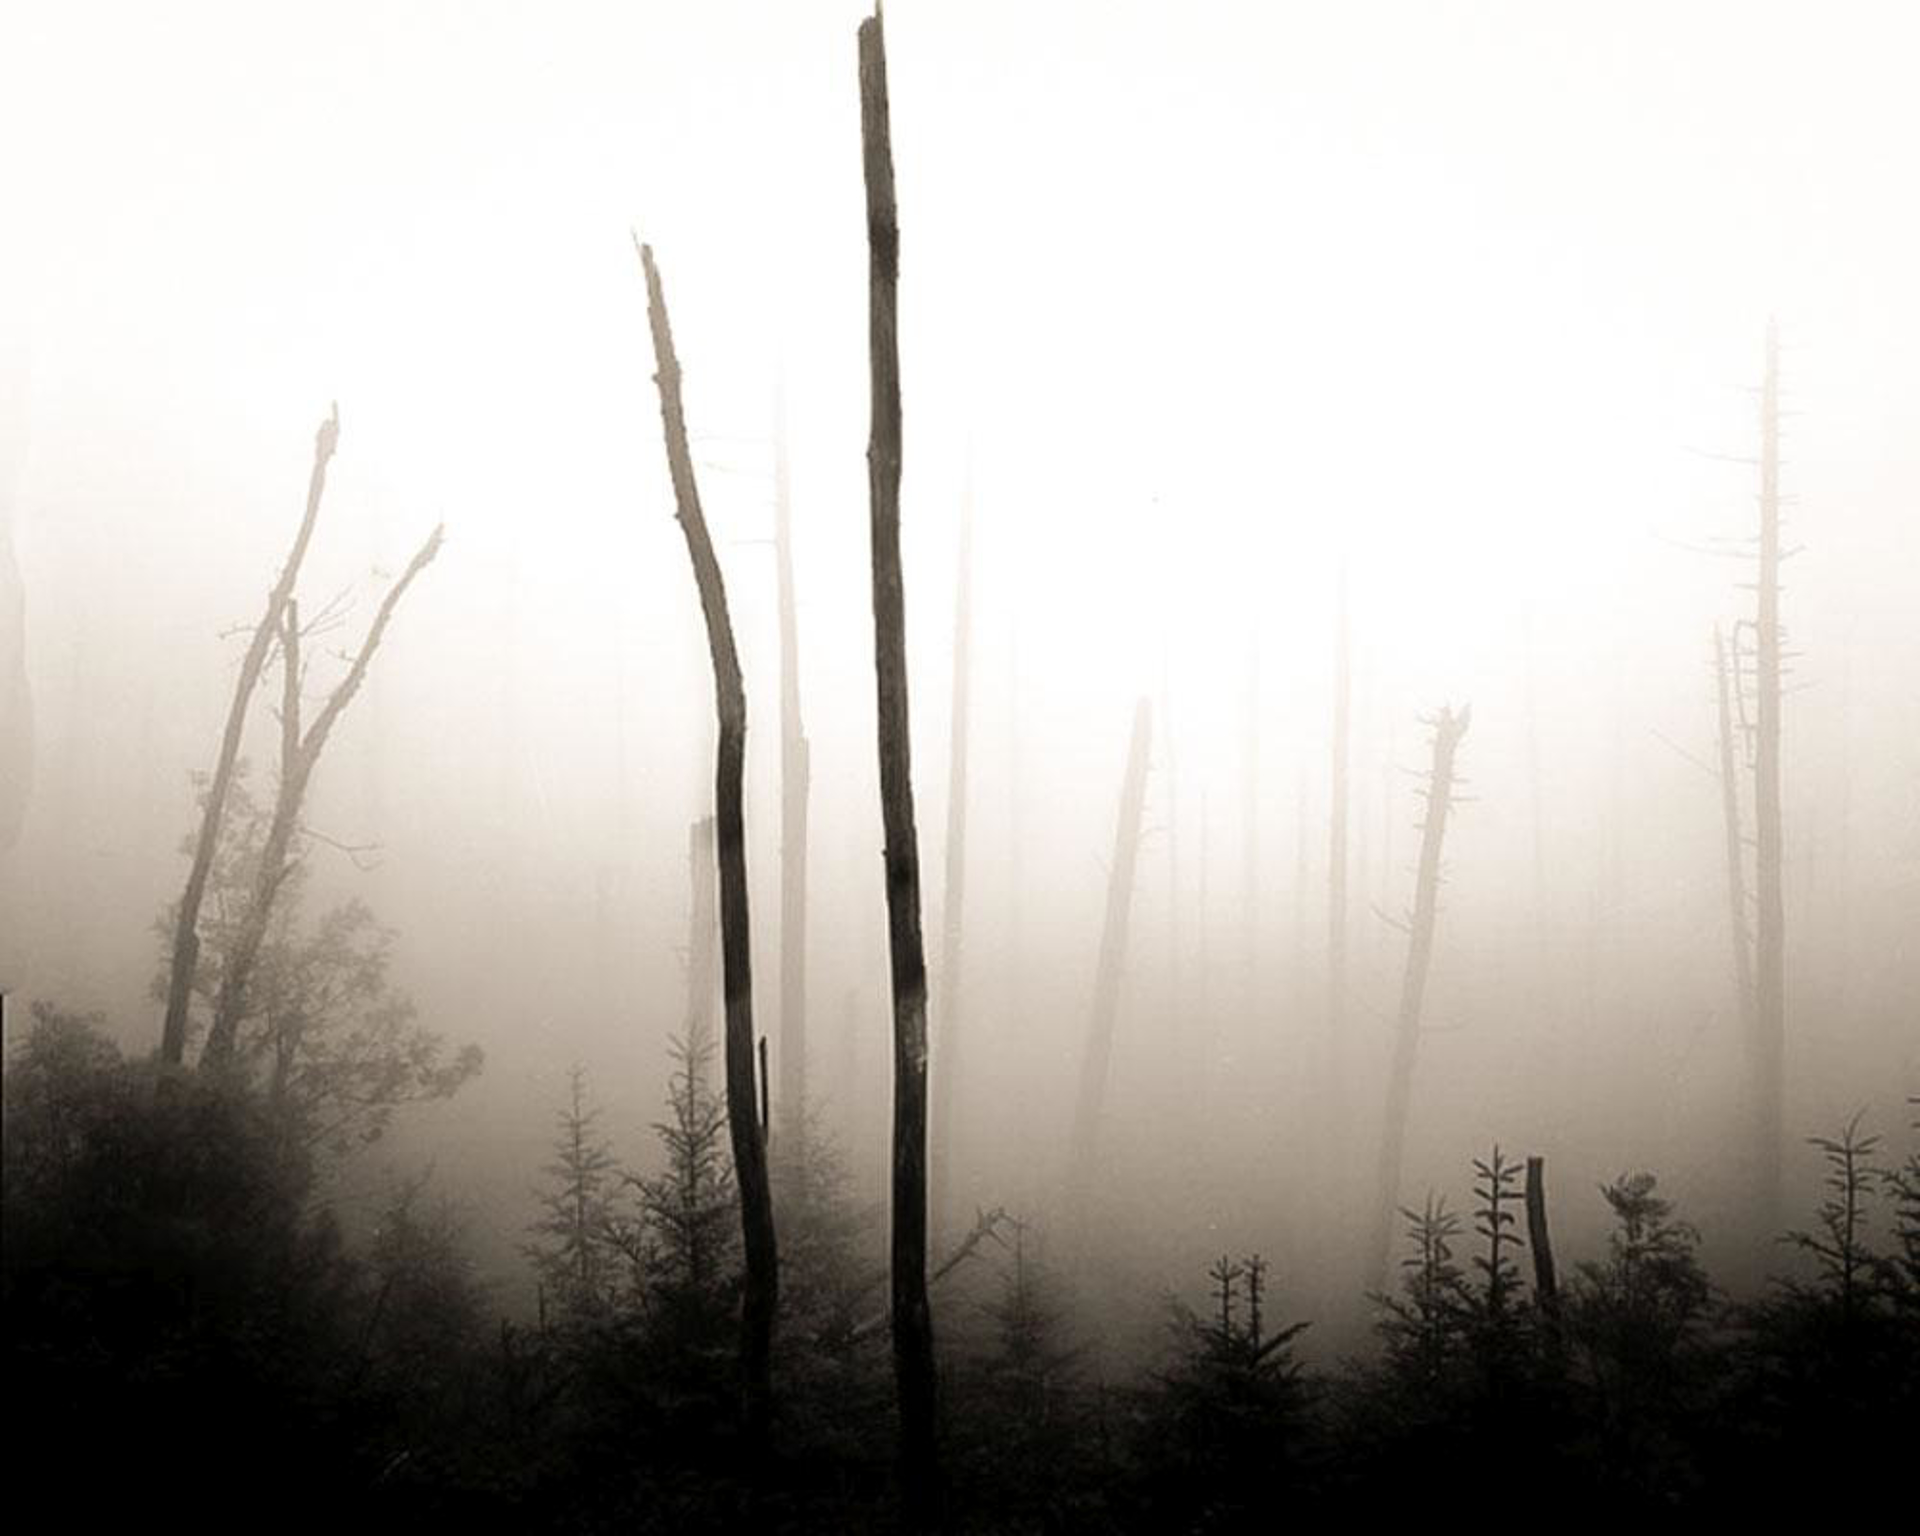 Two Trees in Fog, Mt Mitchell, NC (#145) by Frank Hunter